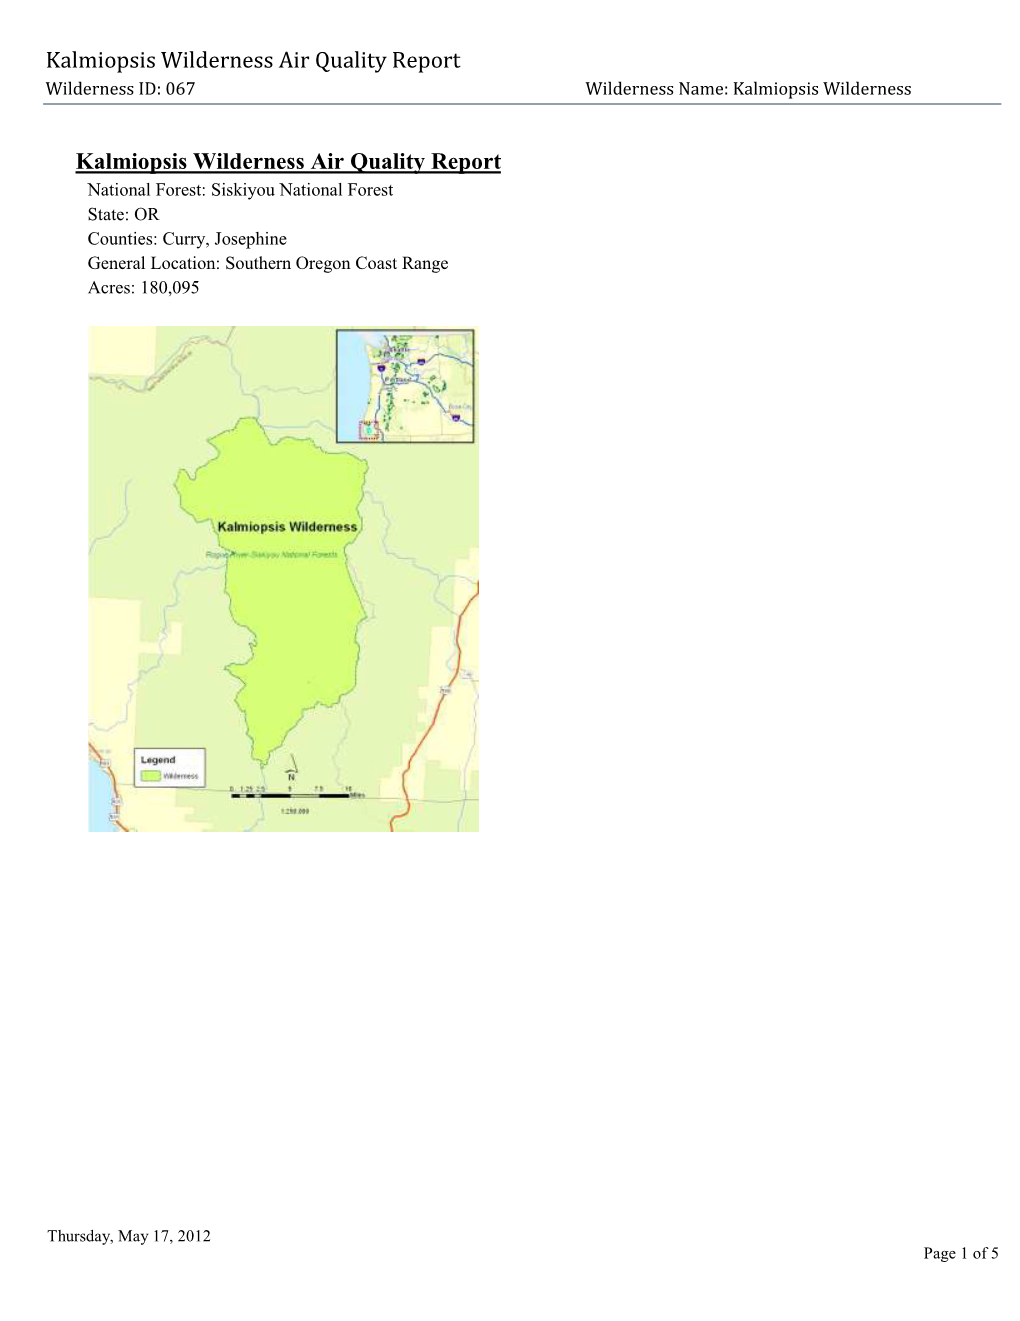 Kalmiopsis Wilderness Air Quality Report, 2012